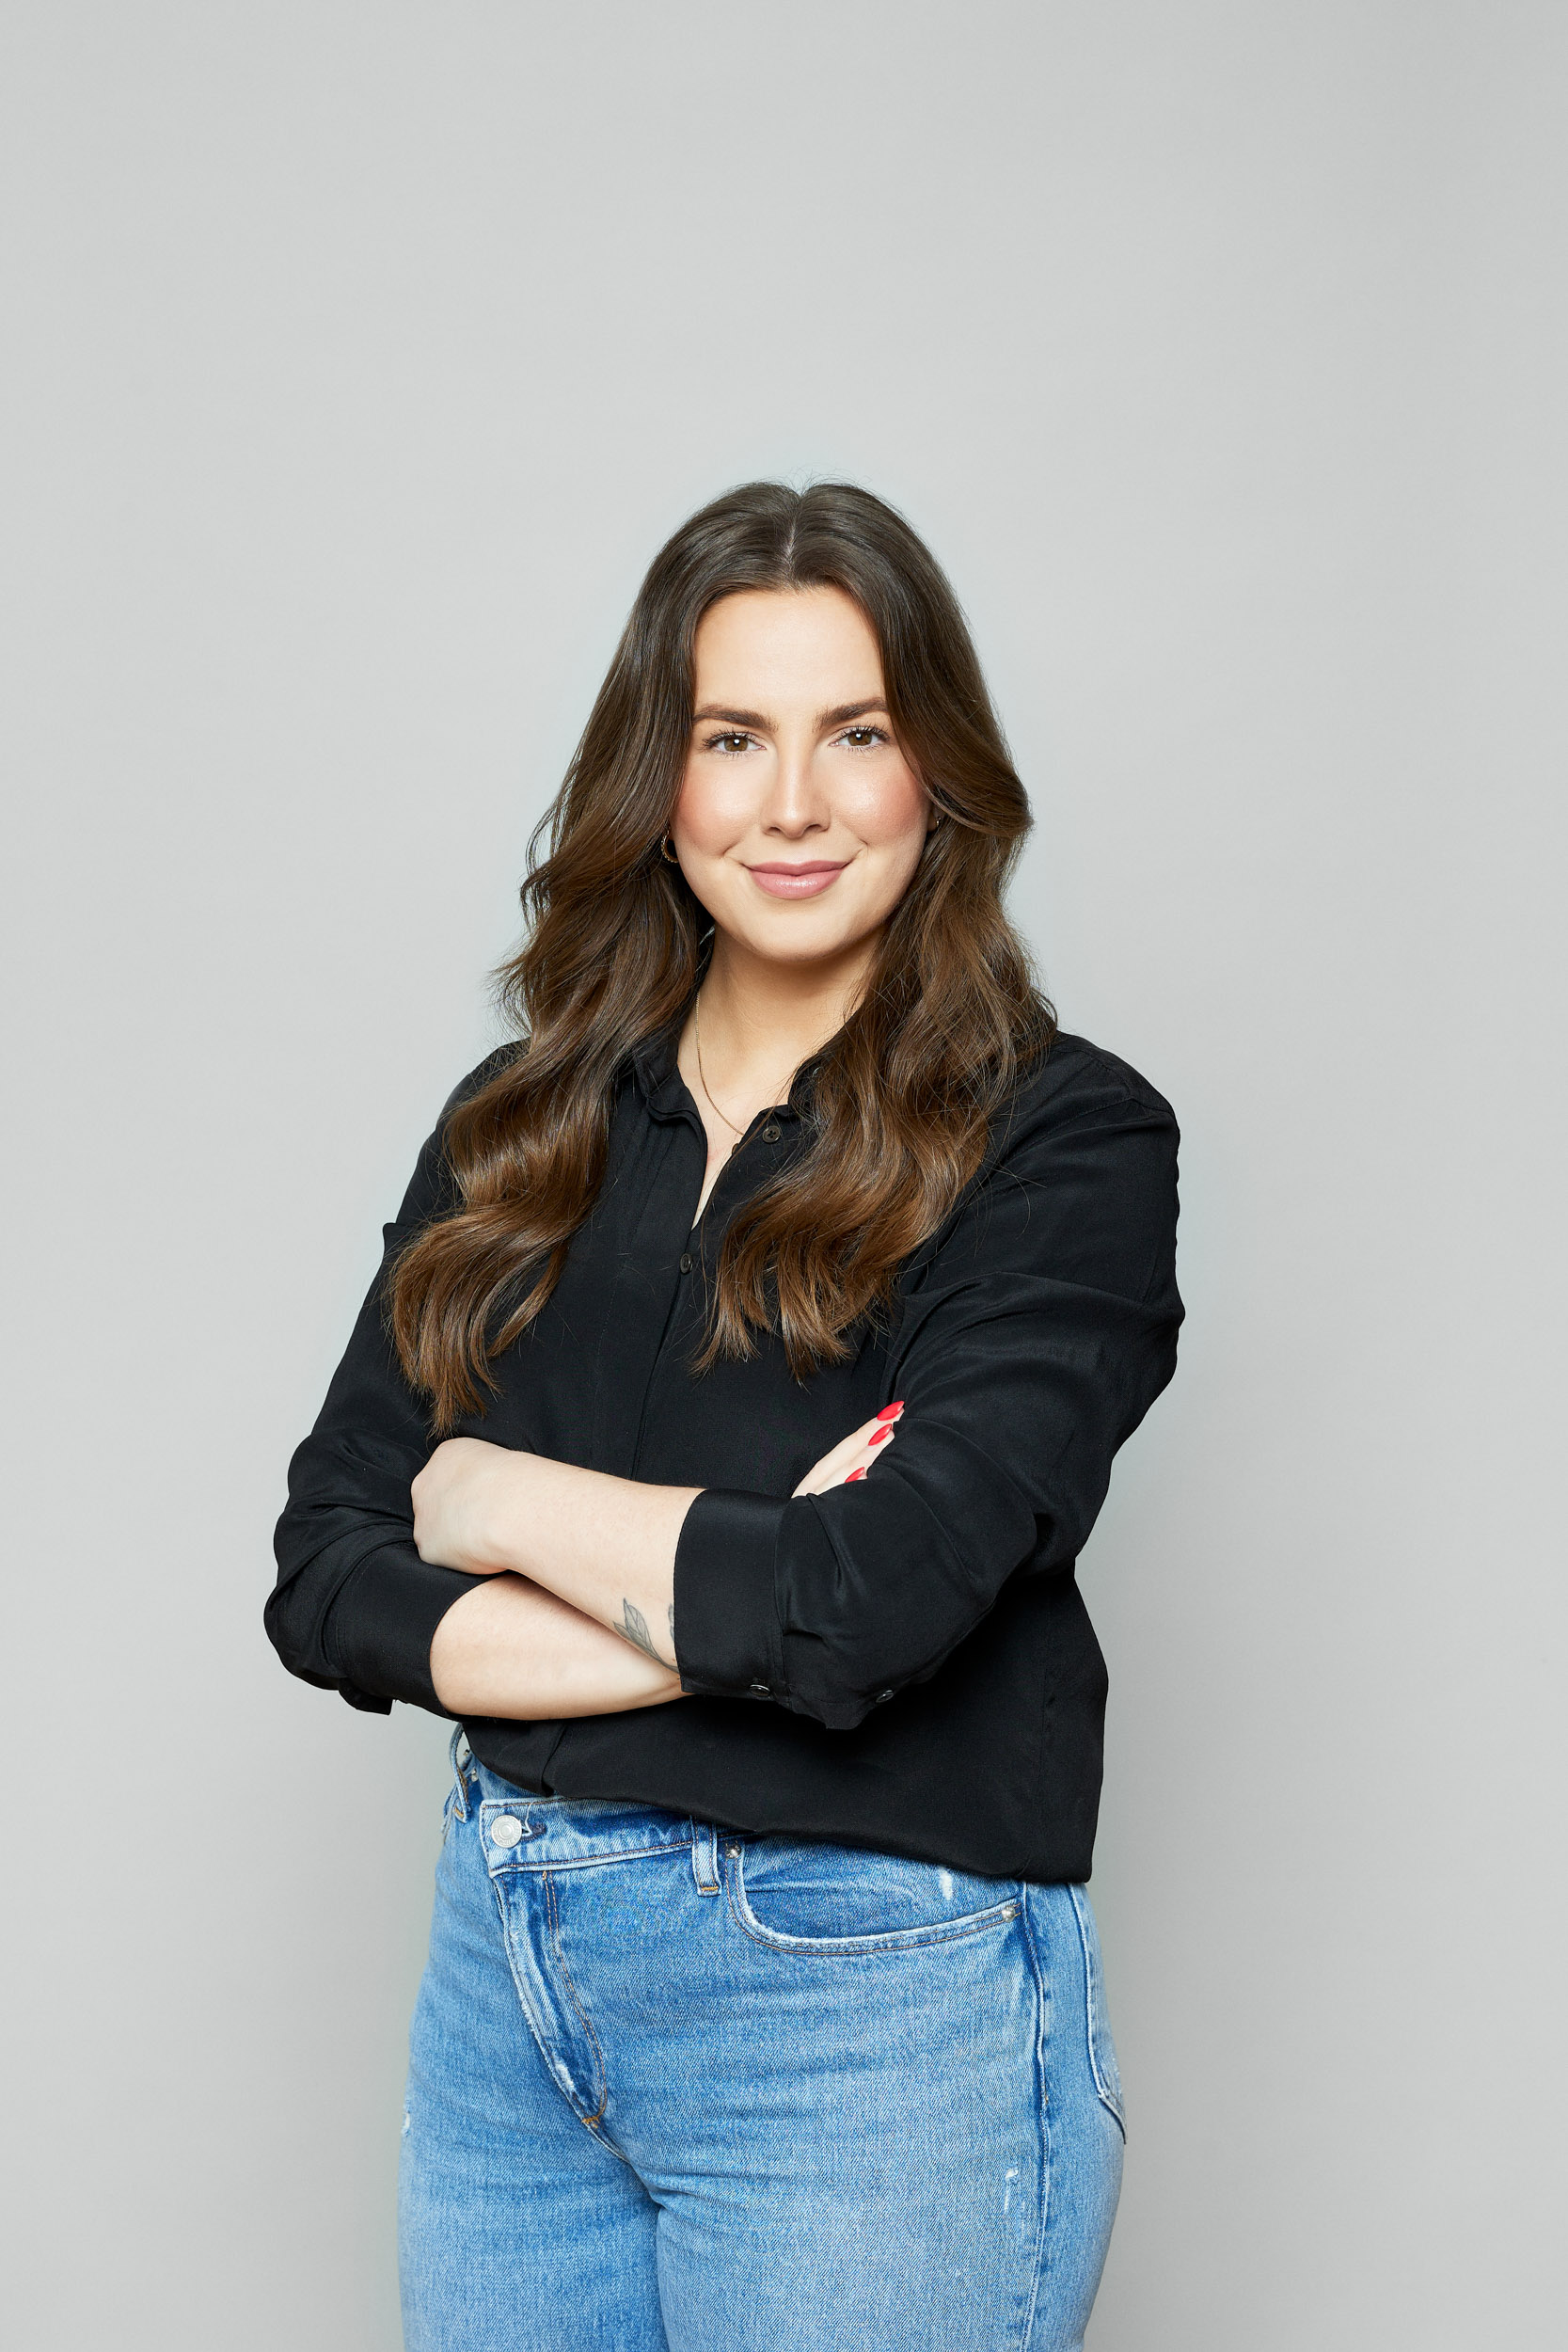 A woman in jeans and a black shirt posing for a photo.